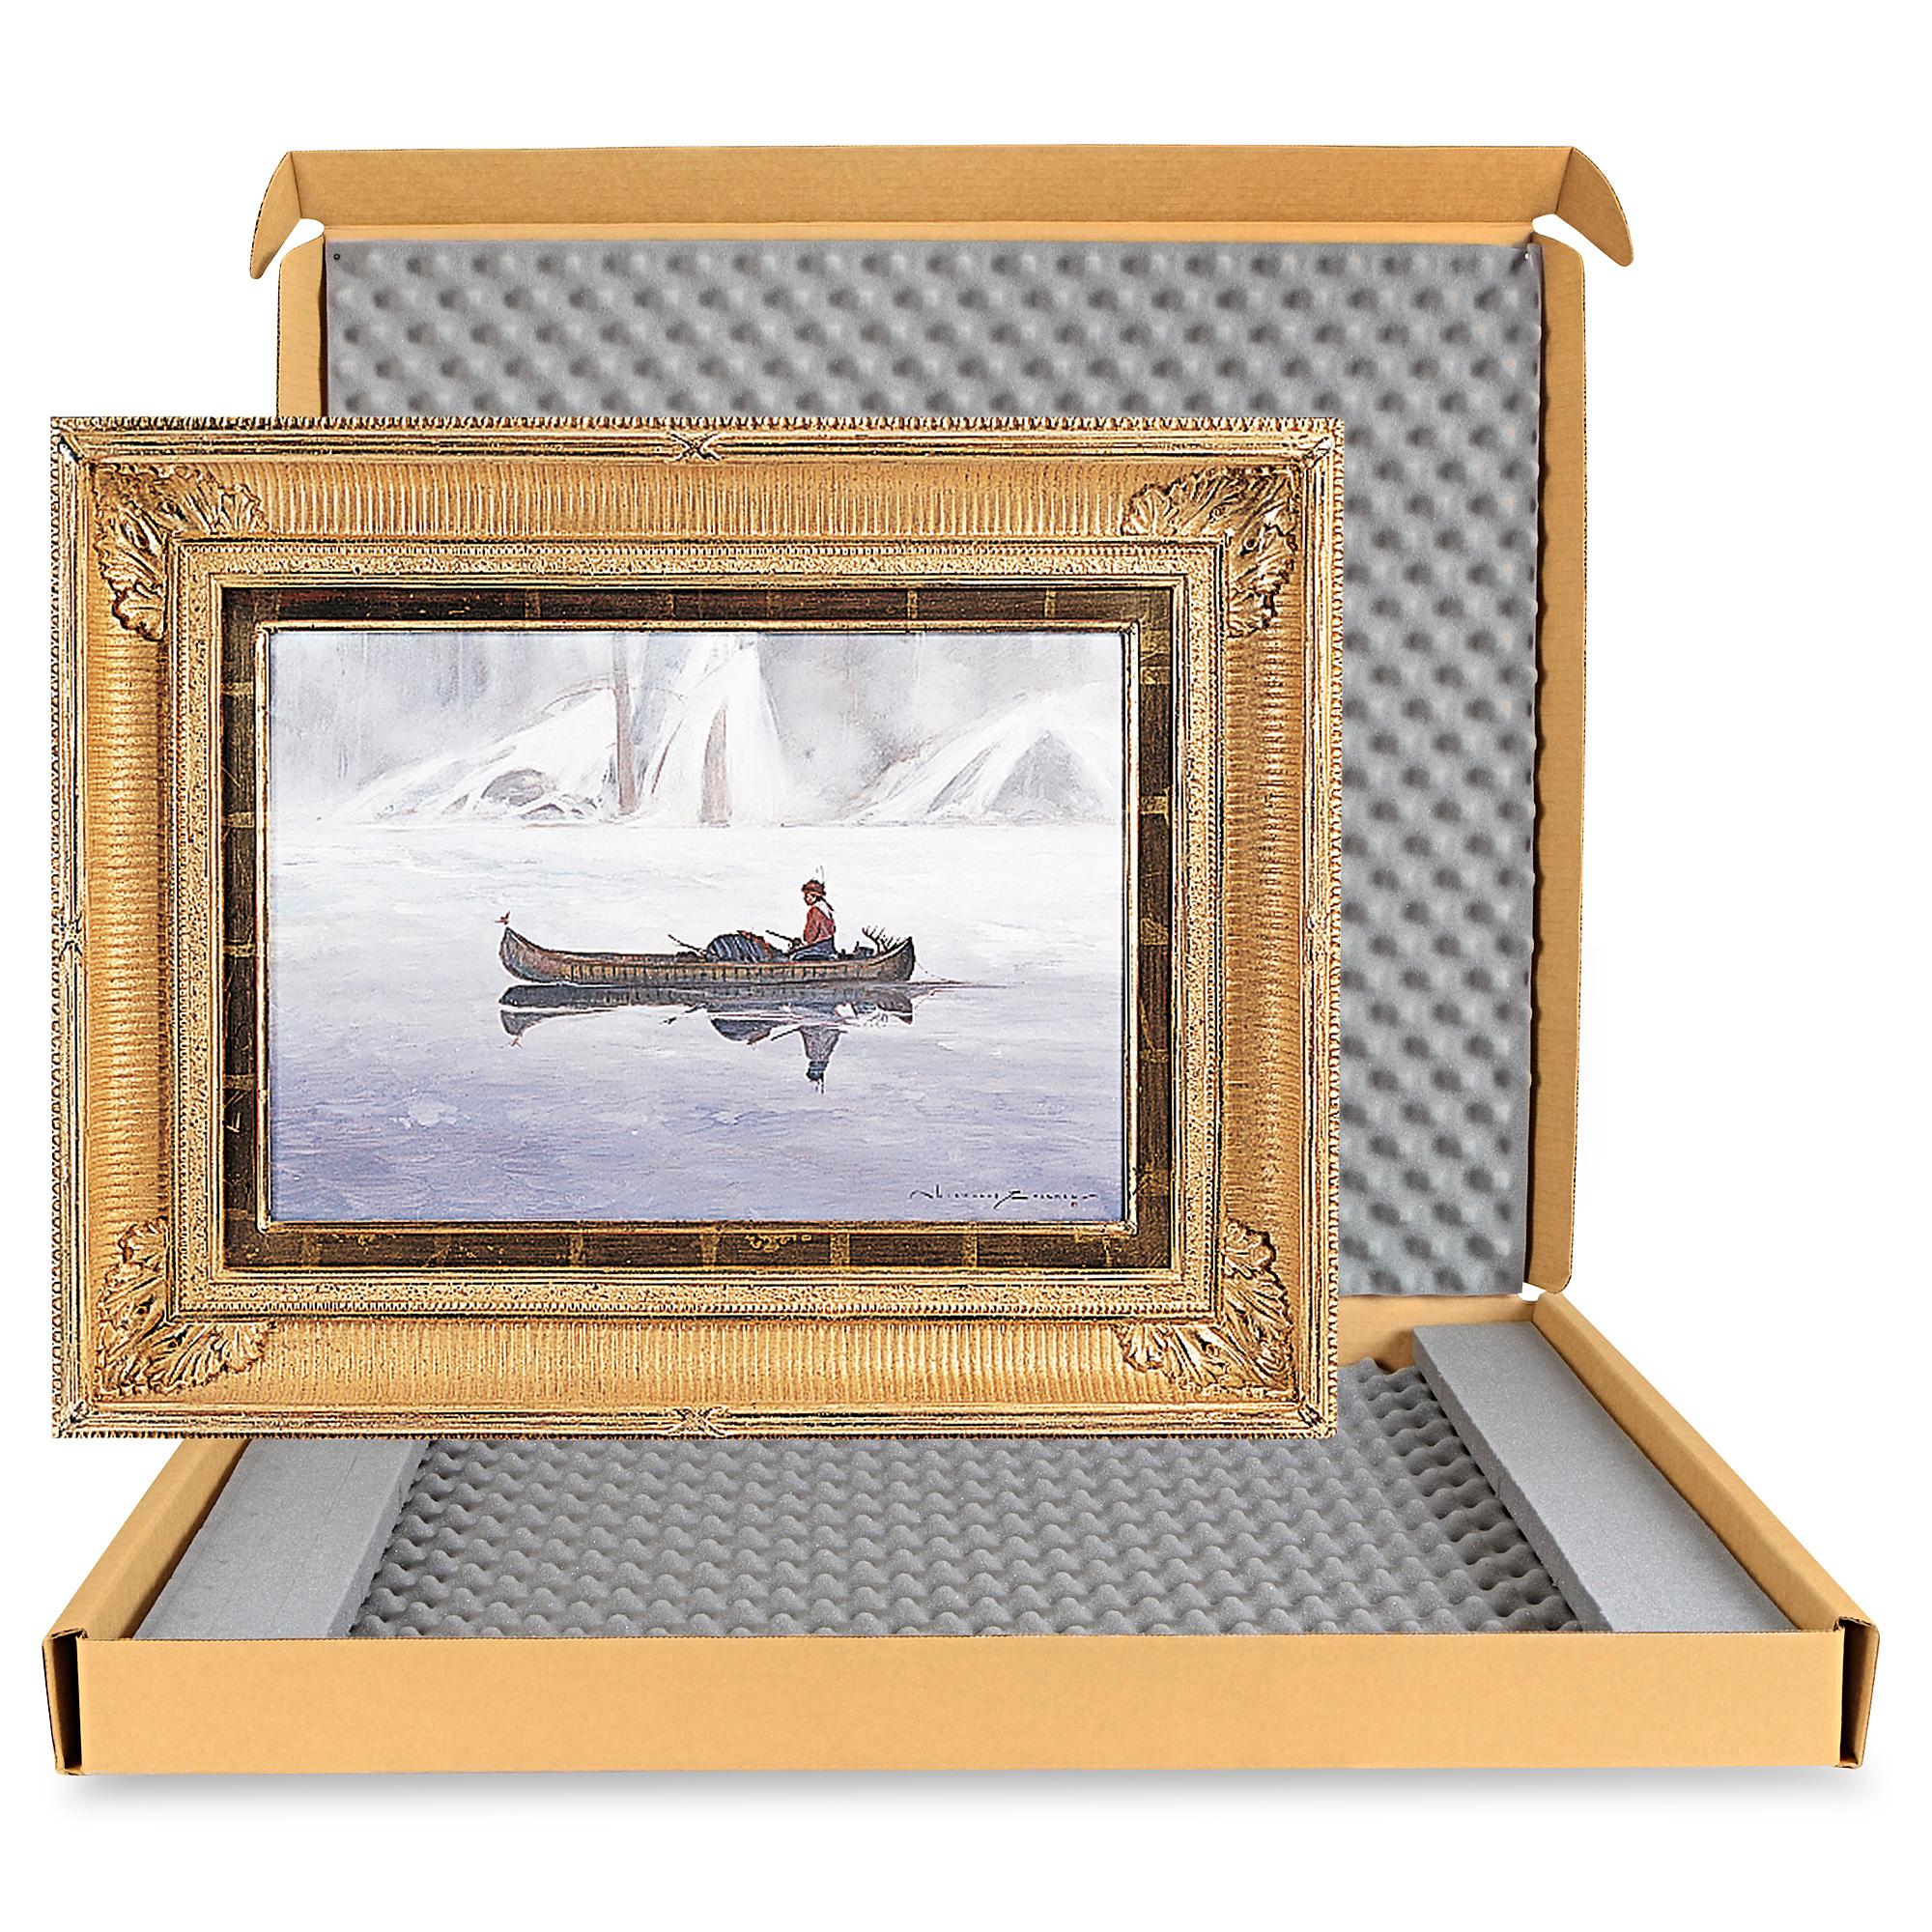 Picture Frame Boxes, Artwork Shippers, Art Boxes in Stock - ULINE